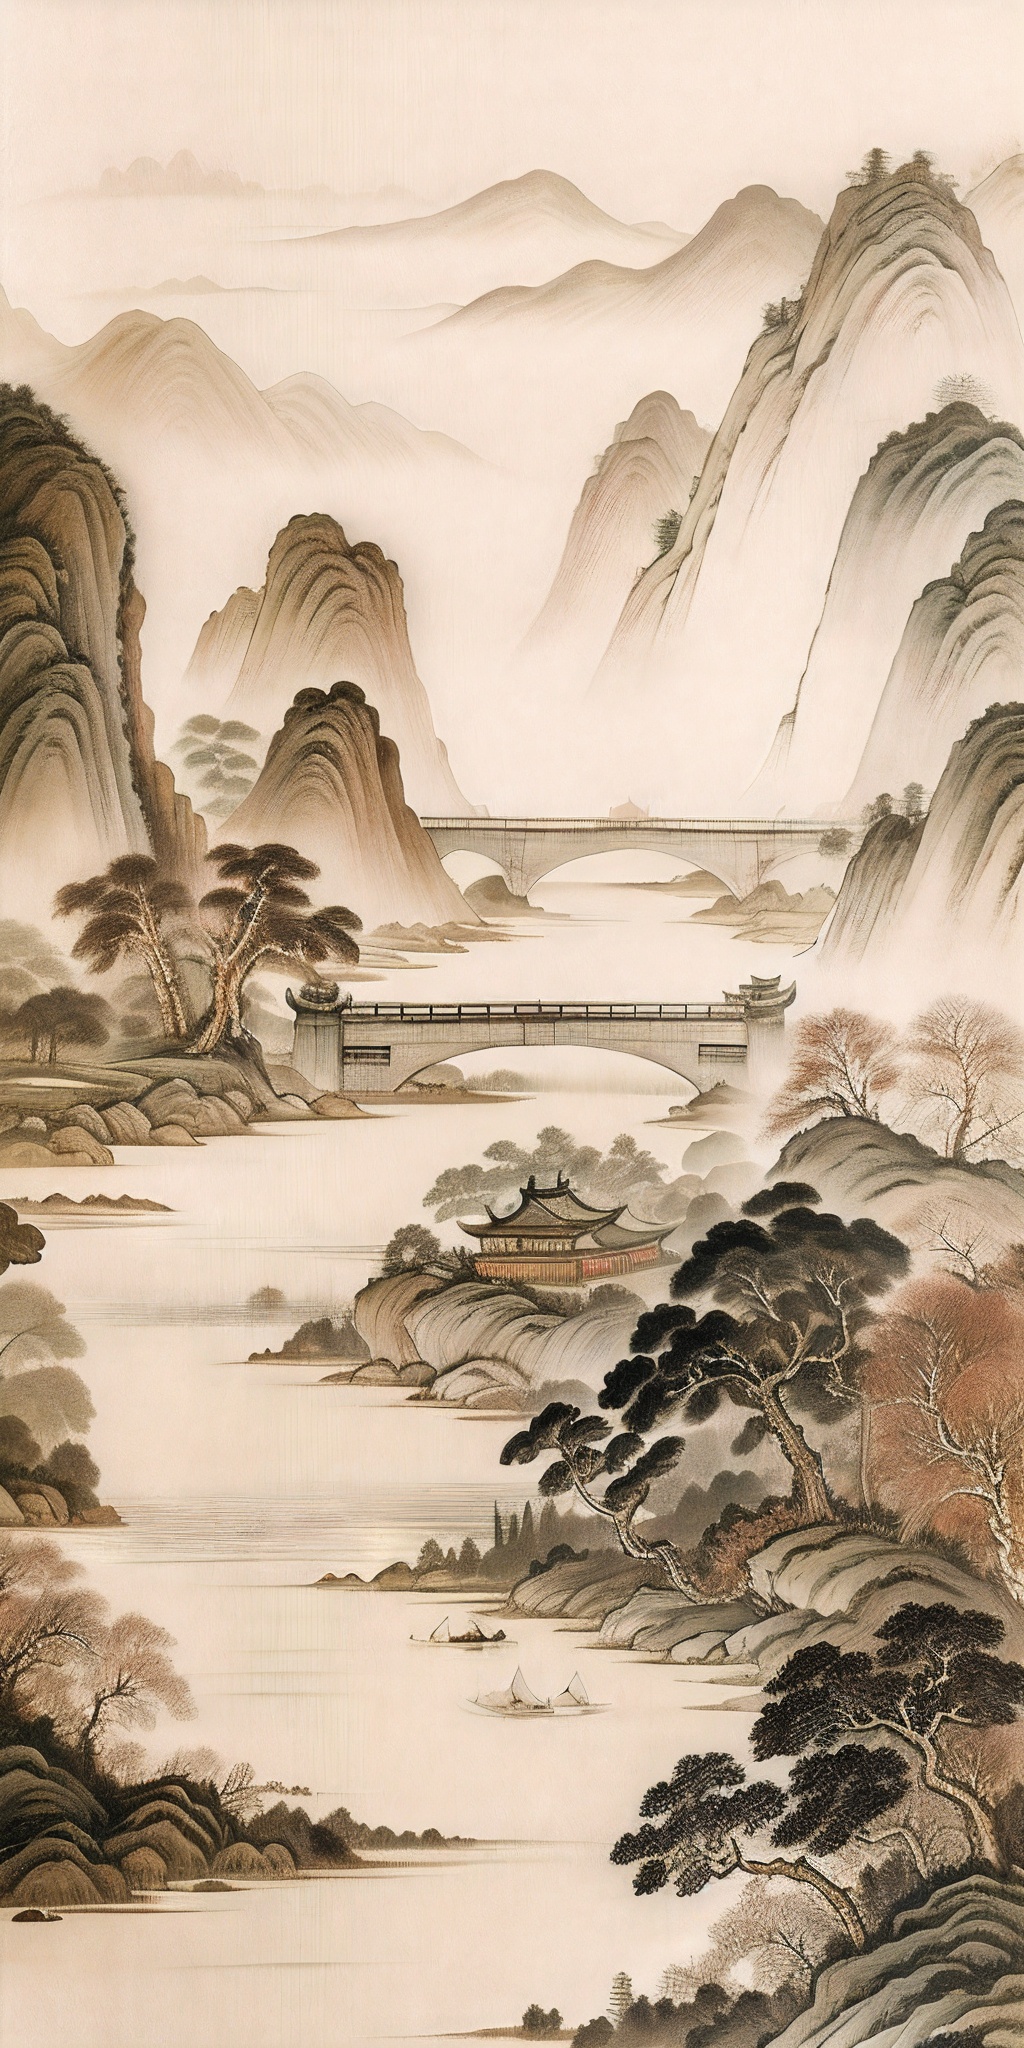 QIEMANCN,chinese painting,chinese style,a painting of a city with a bridge and a river in the middle of it,